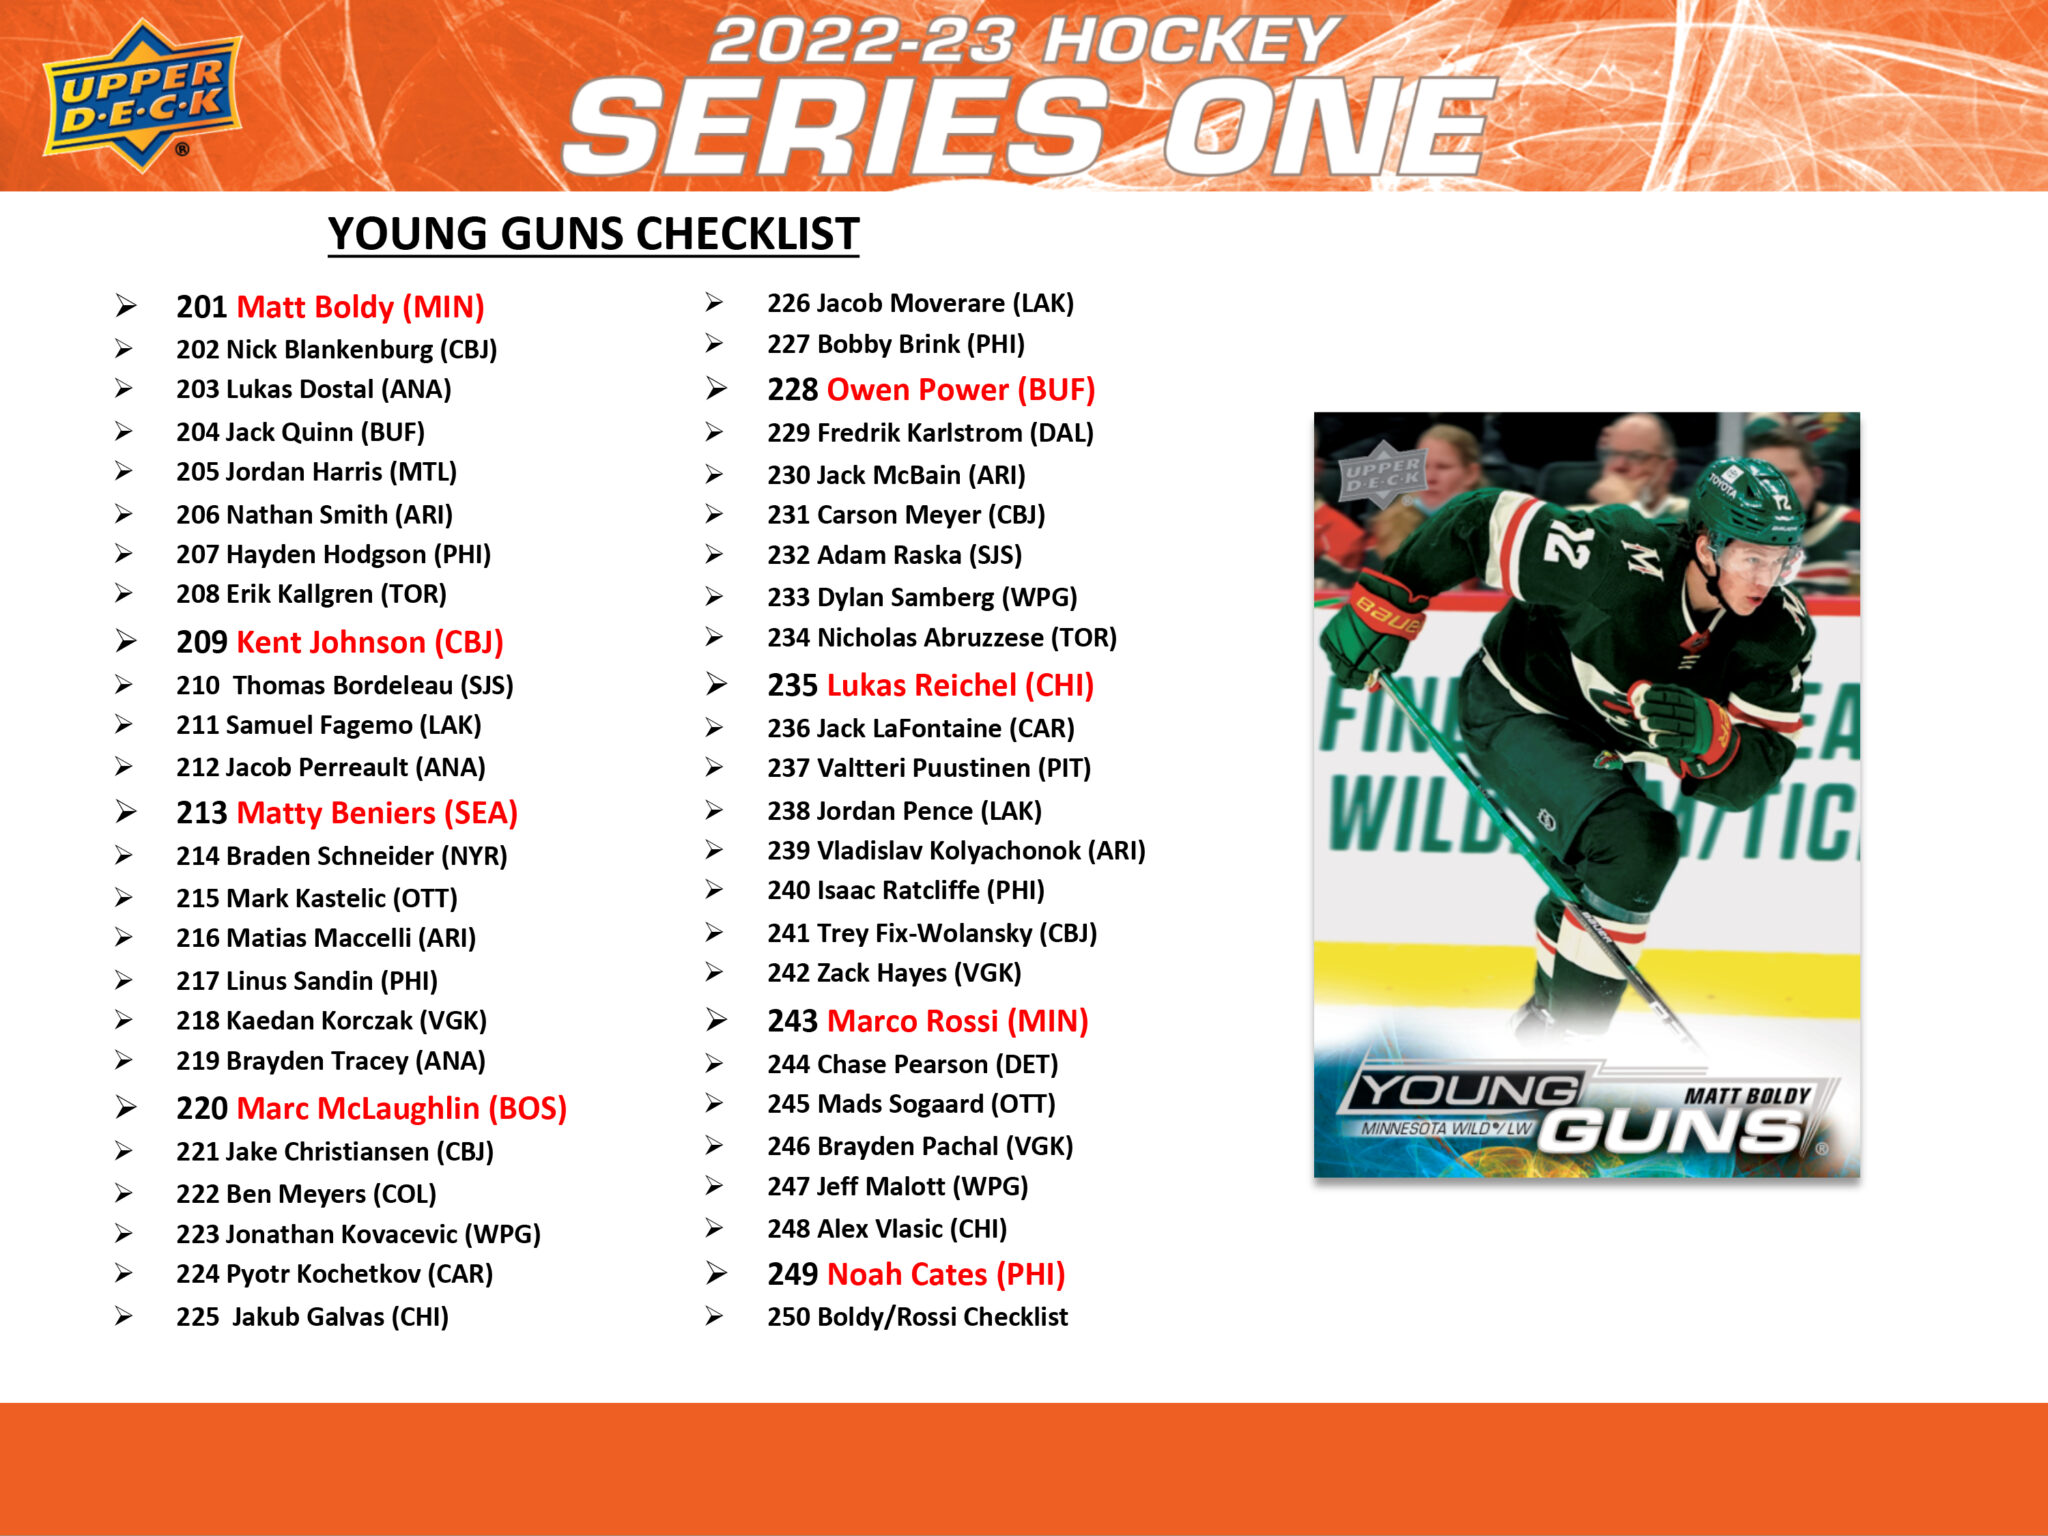 202223 NHL® Upper Deck Series One Young Guns Checklist Revealed